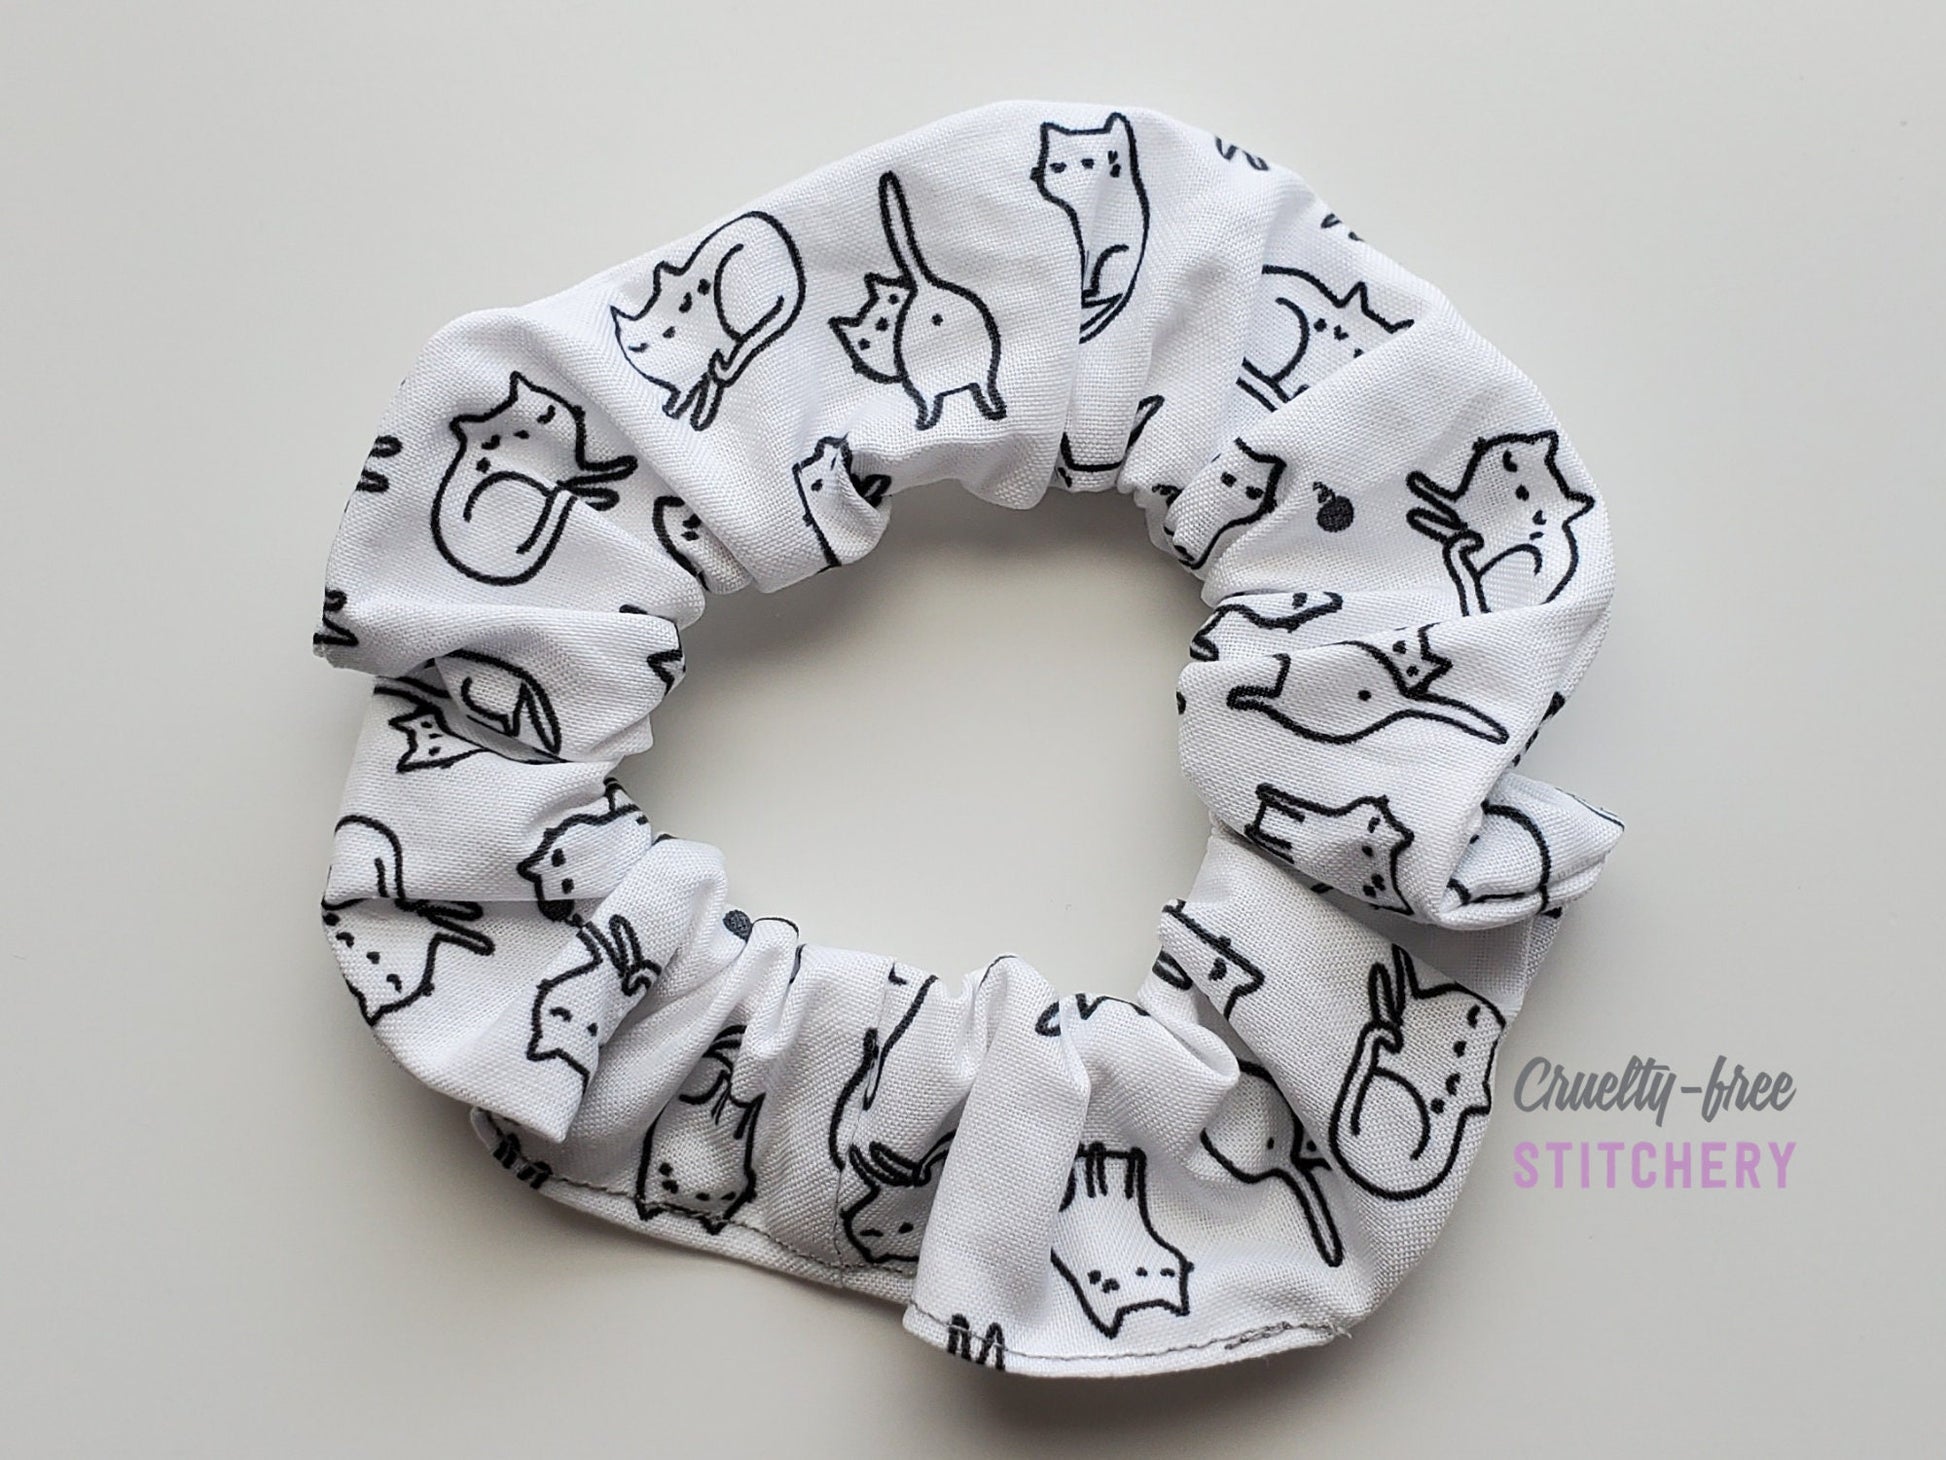 White with black outlined cats scrunchie on a plain white background.